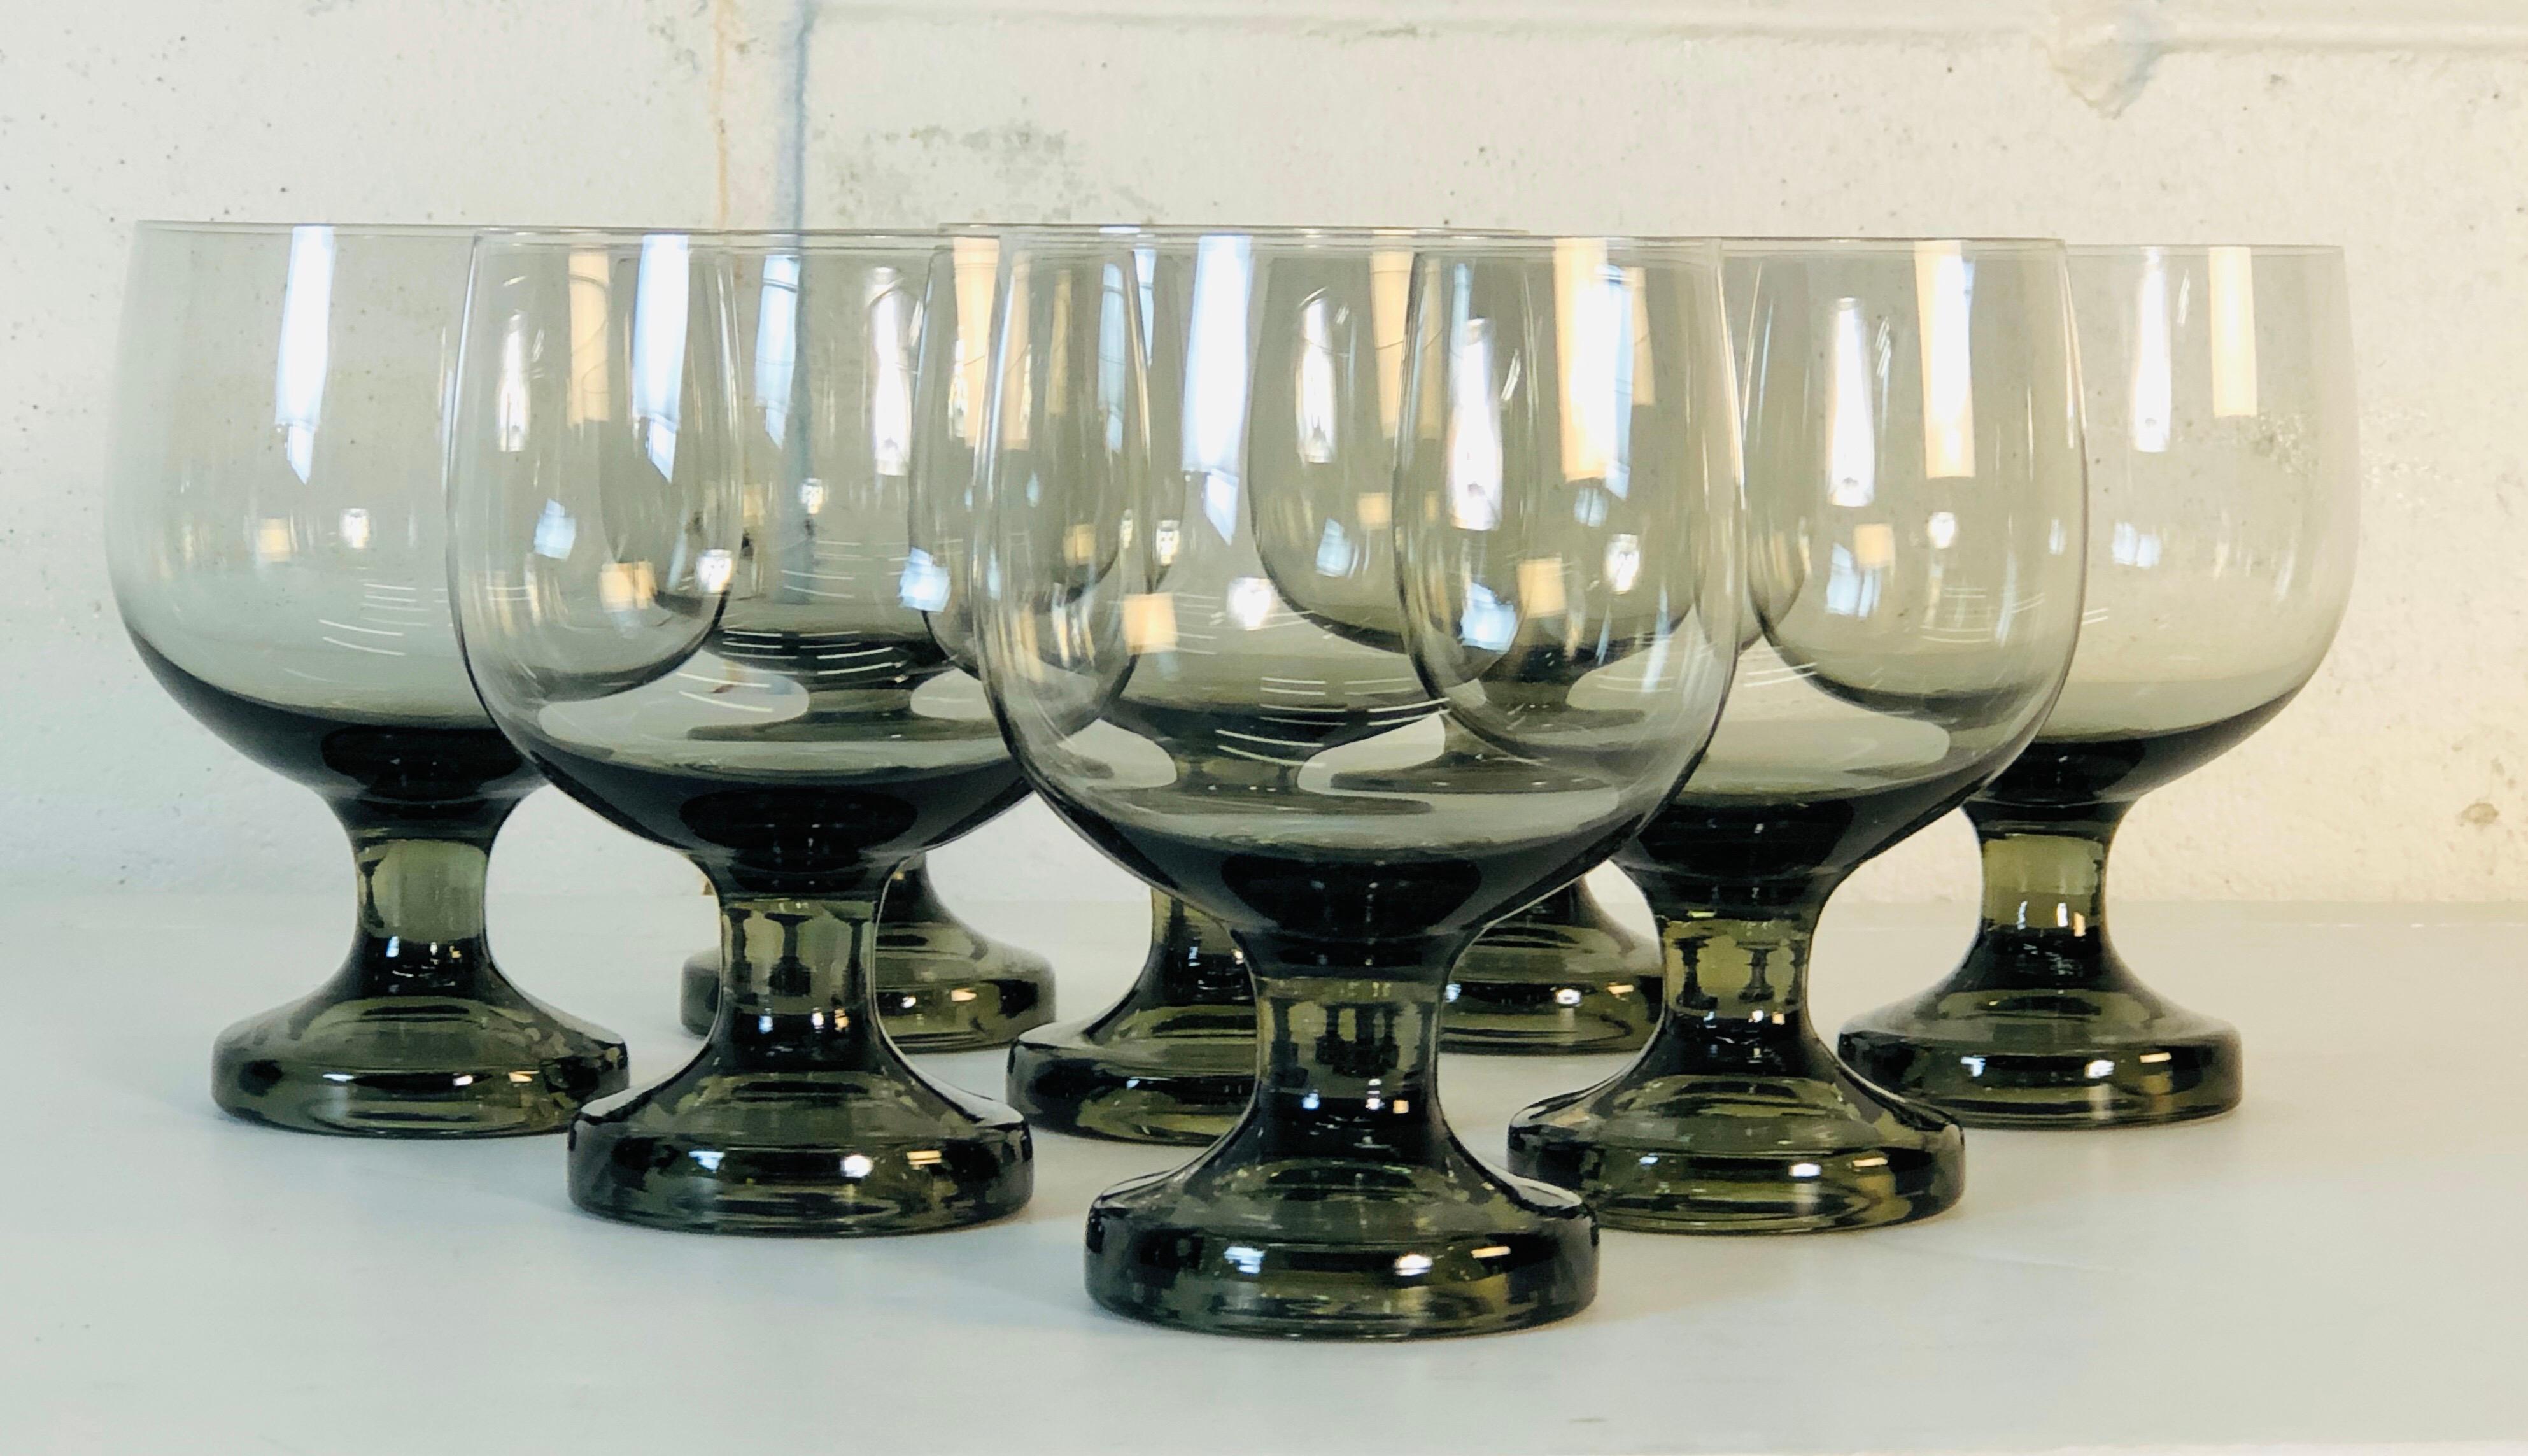 Vintage 1960s Smoked Glass Goblets, Set of 8 1